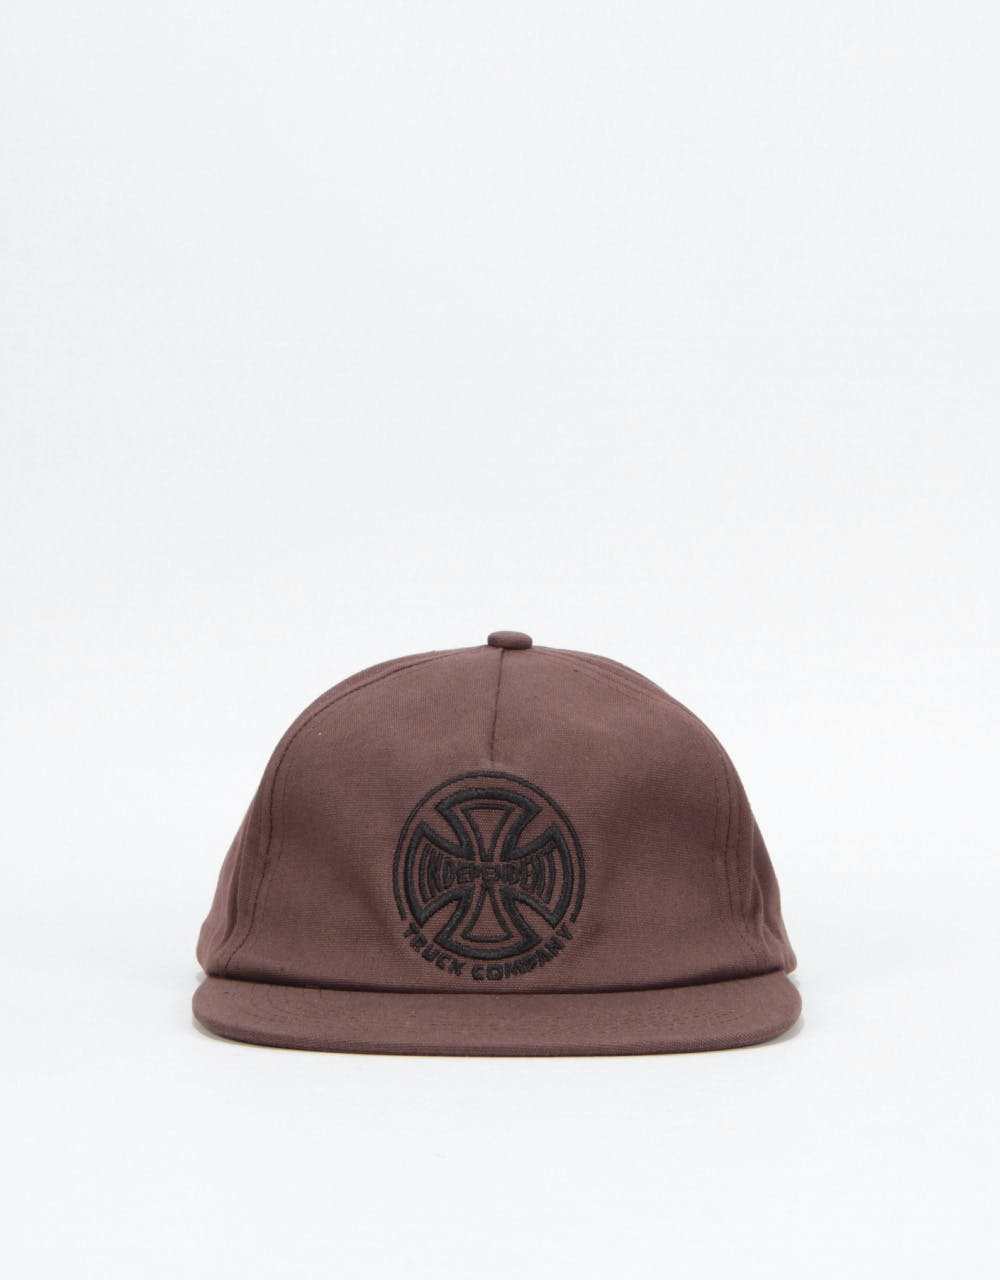 Independent Cap Truck Company Embroidery Cap - Chocolate